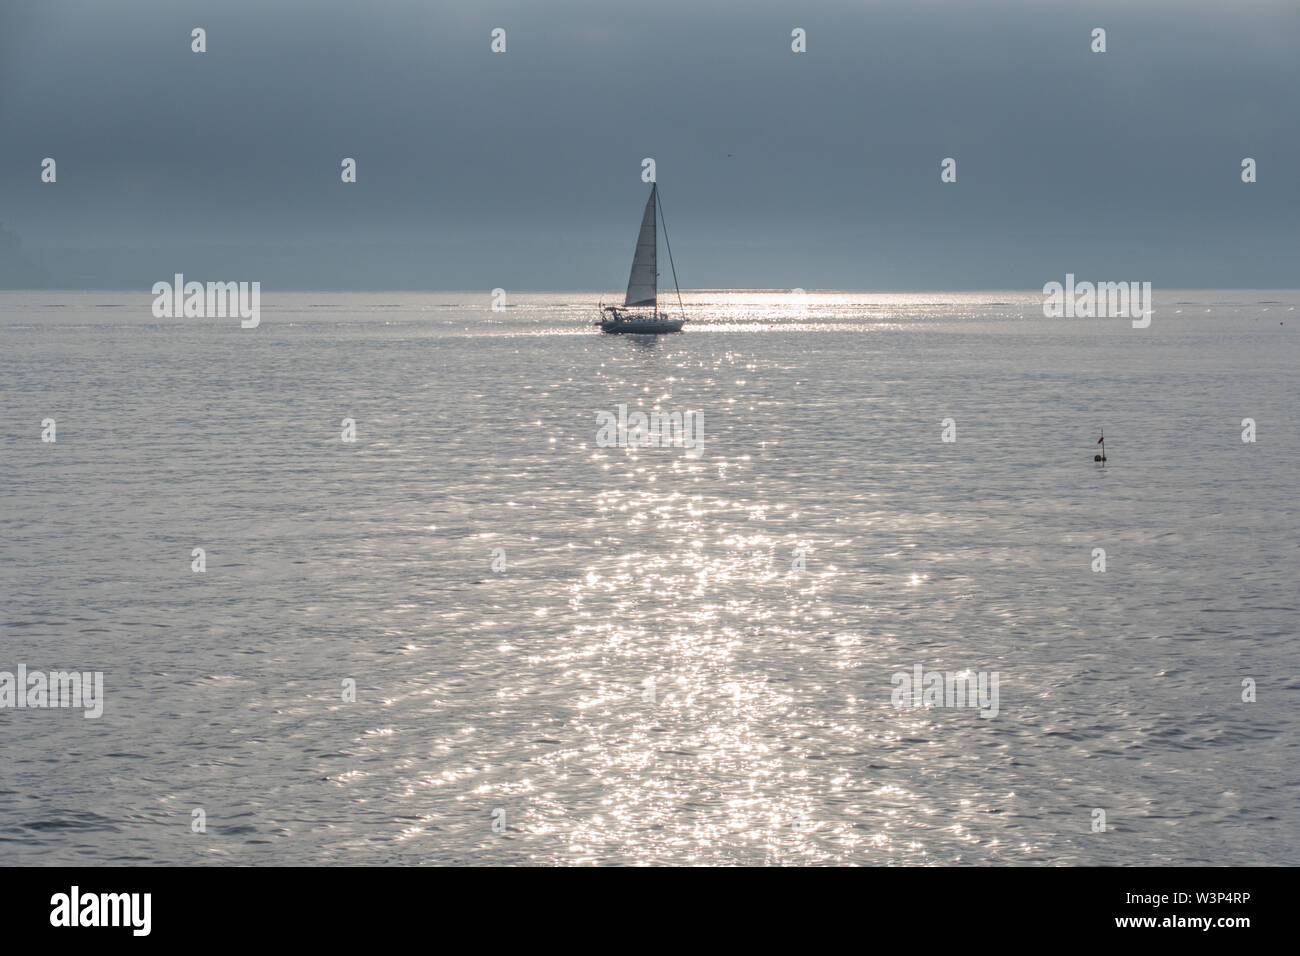 Newlyn, Cornwall, UK. 17th July 2019. UK Weather.  Warm and sunny but not much wind for this sailing boat leaving it's overnight mooring at Newlyn.  Credit Simon Maycock / Alamy Live News. Stock Photo